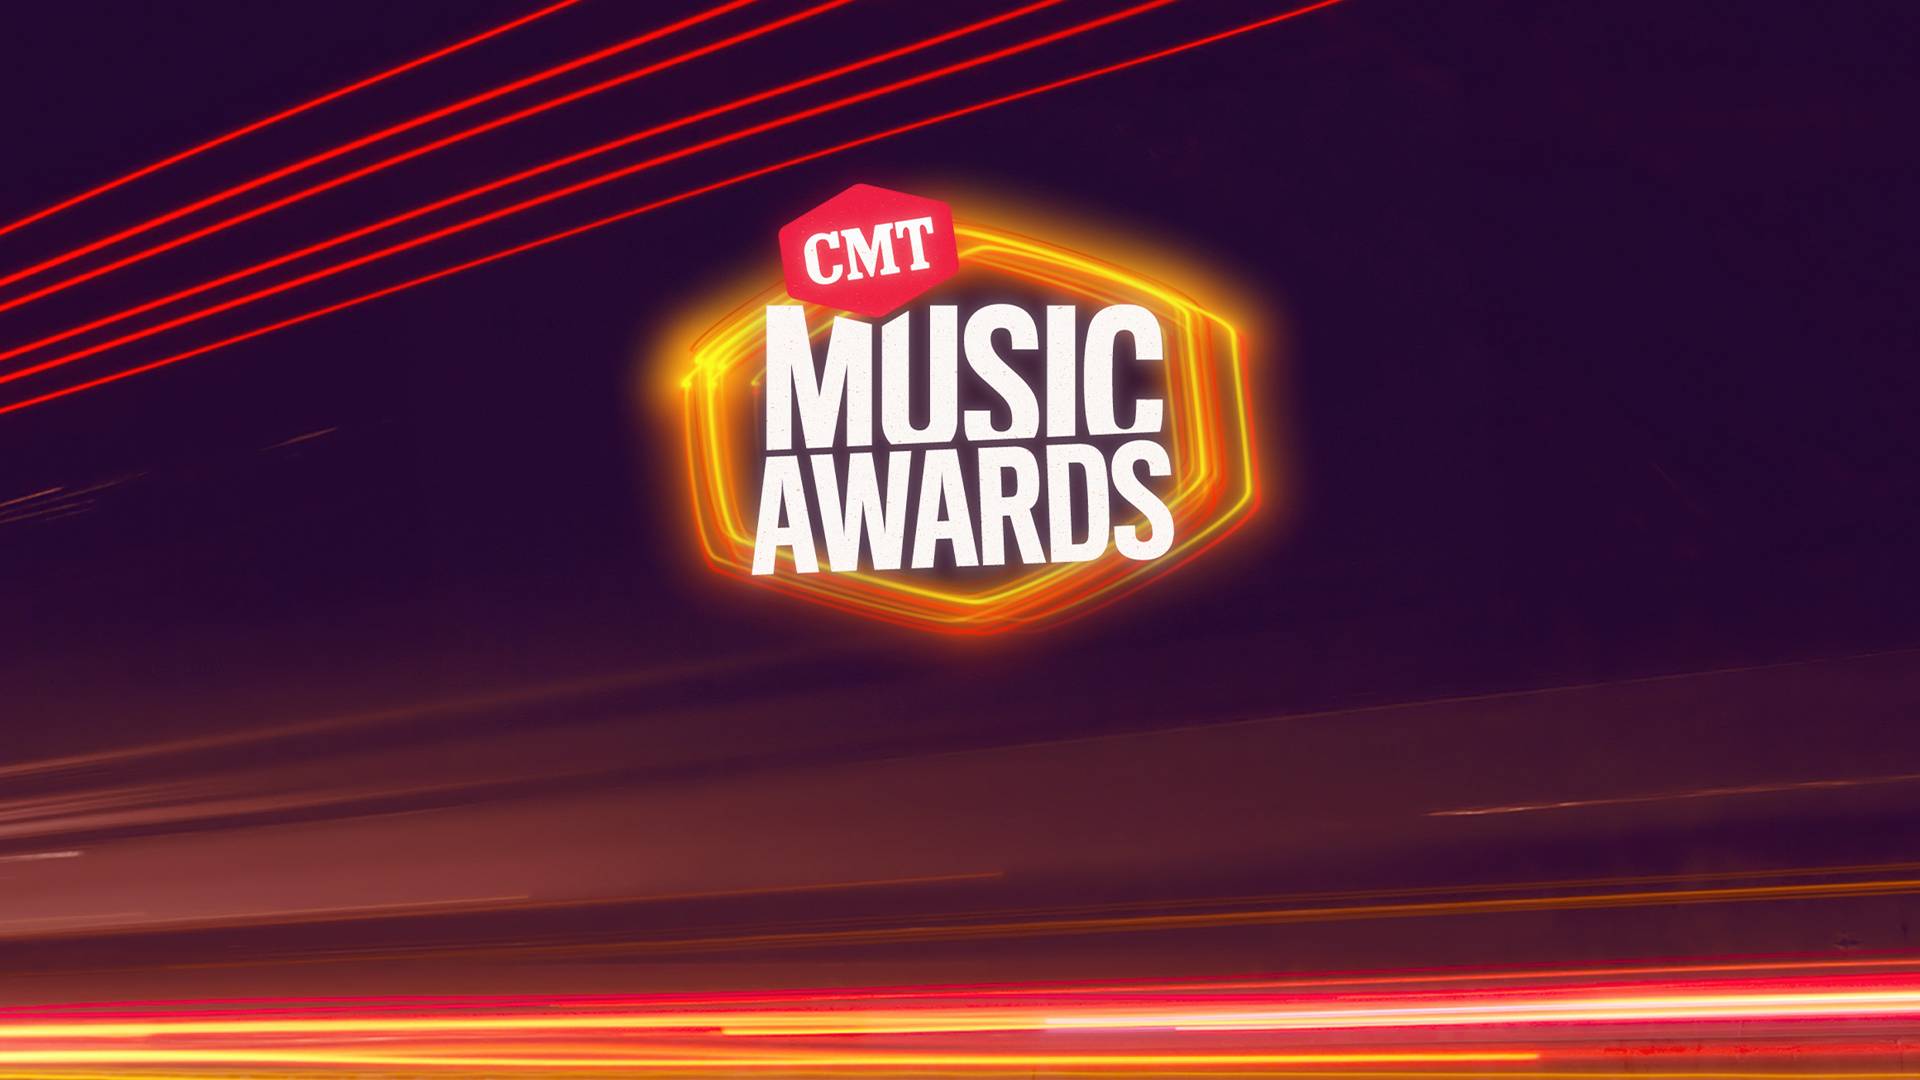 How to Watch the 2023 CMT Music Awards Live on Roku, Fire TV, Apple TV, & More on April 2